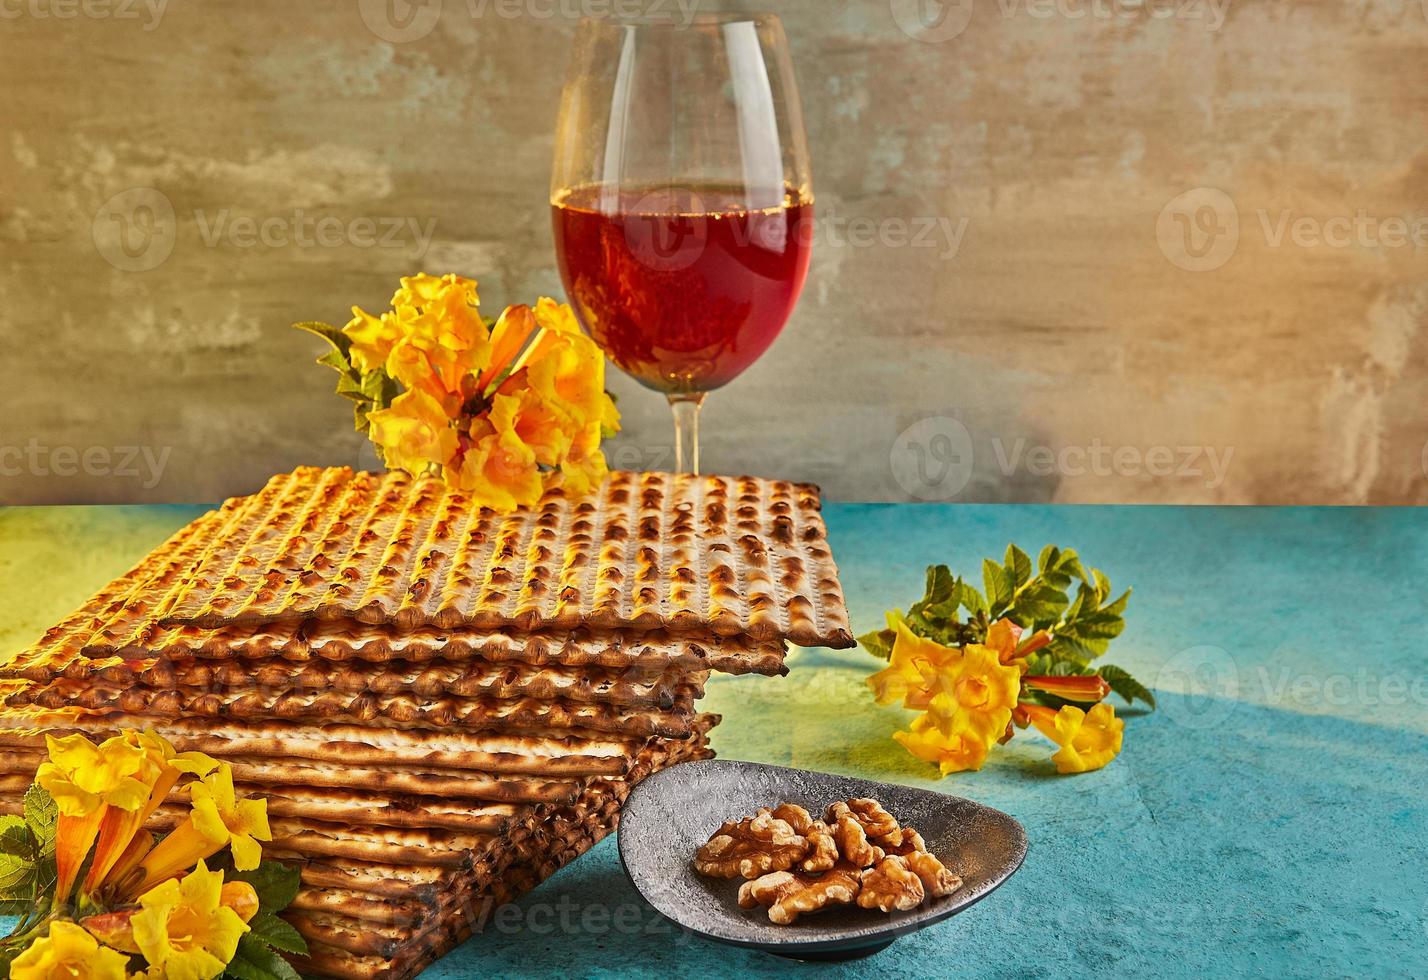 Pesach celebration concept - Jewish holiday Pesach. Background with yellow flowers with glass of wine, matzah and plate of seder in the rays of the sun. Traditional Jewish inscriptions on plate photo